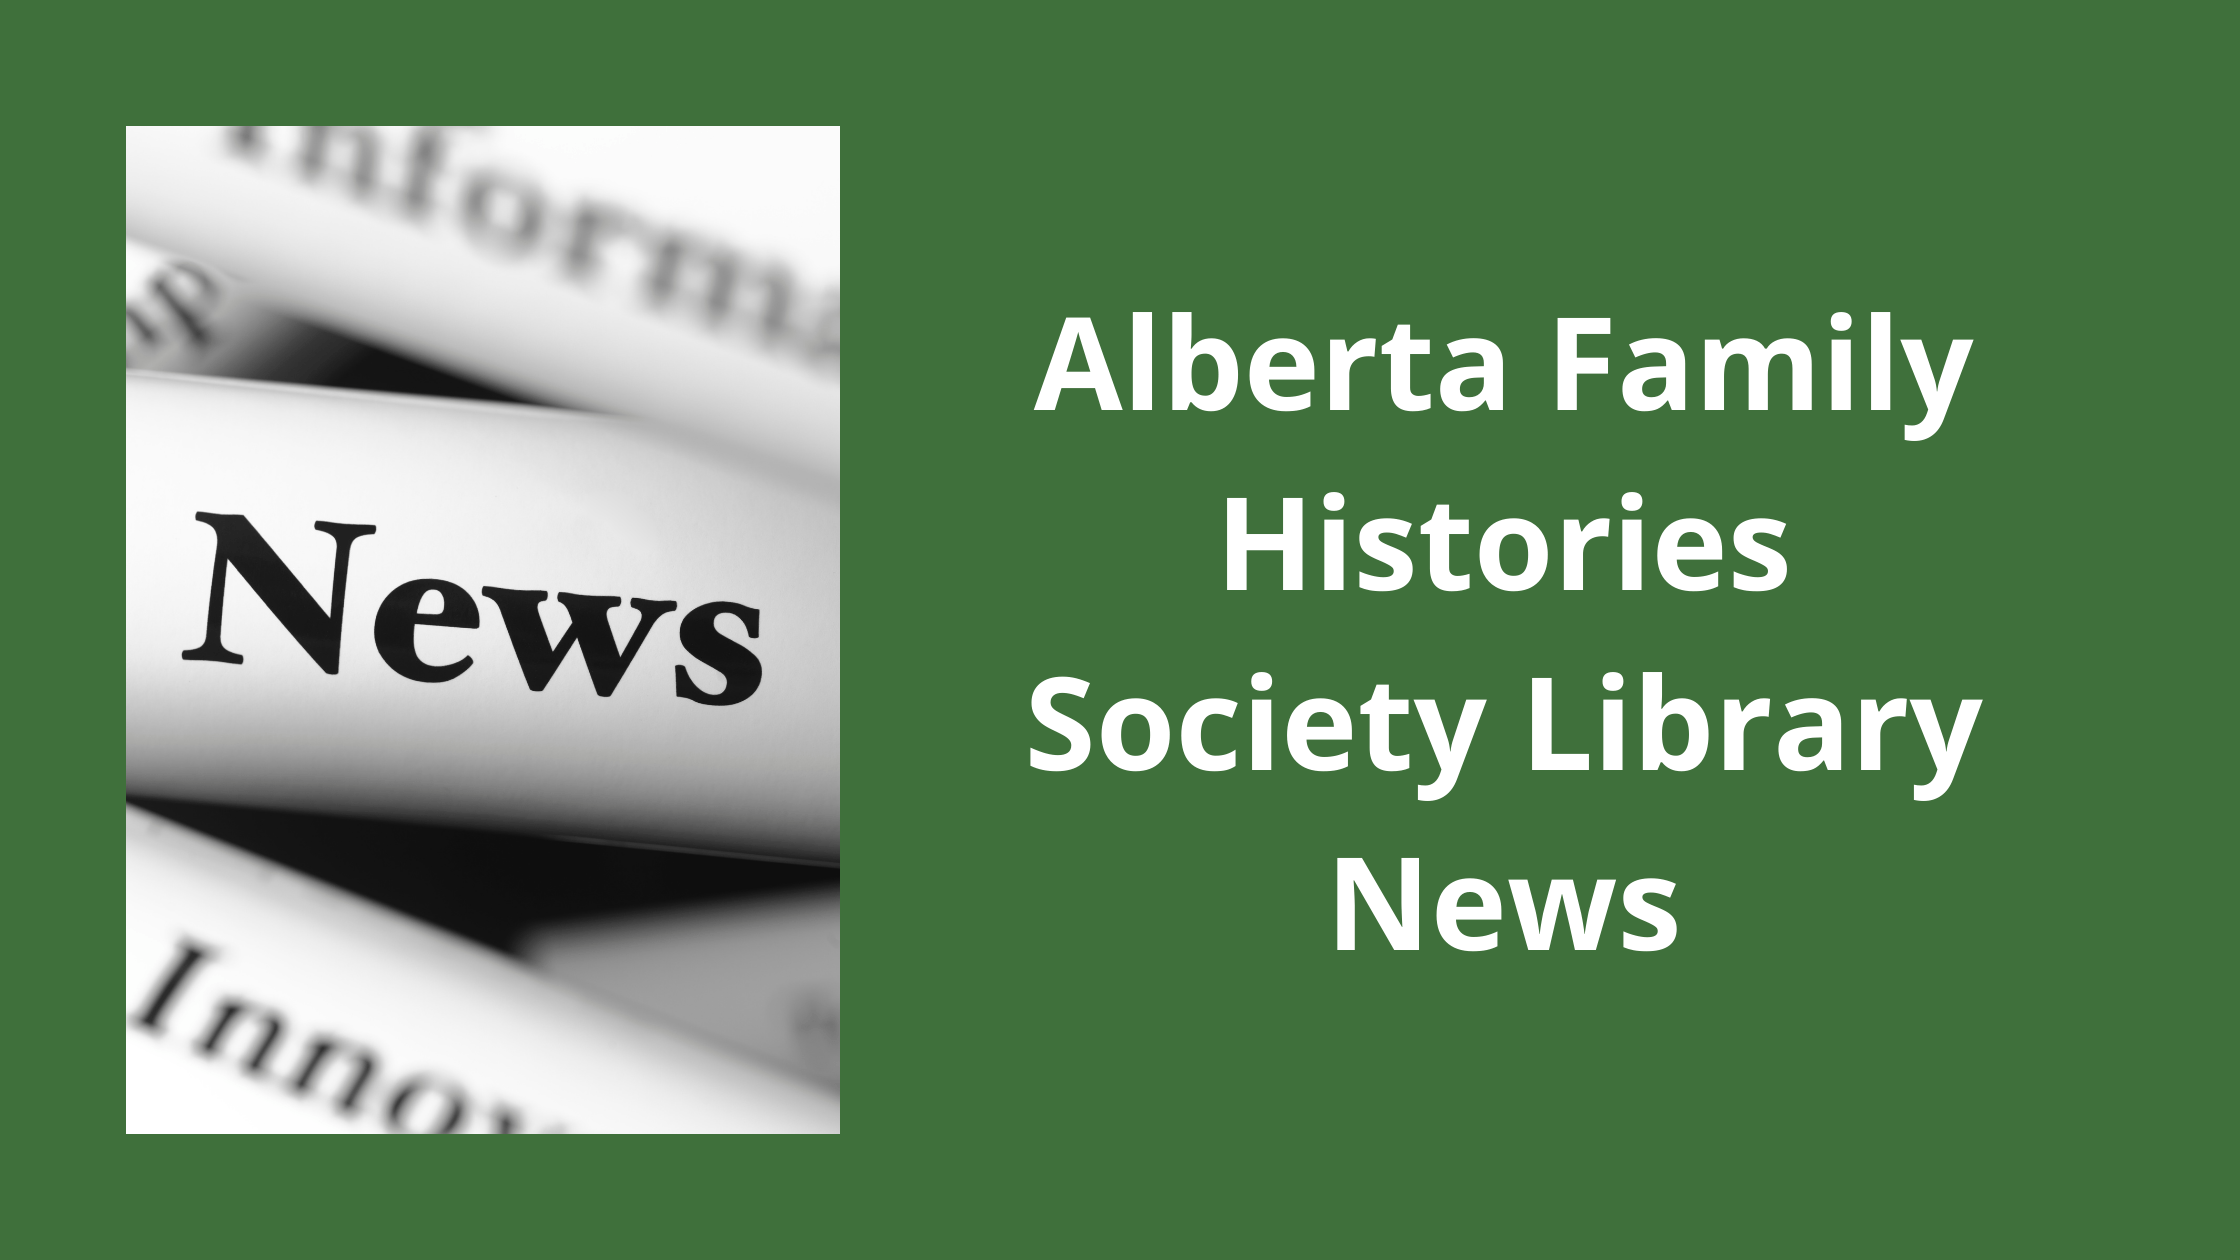 AFHS Library is now a FamilySearch Affiliate Library!